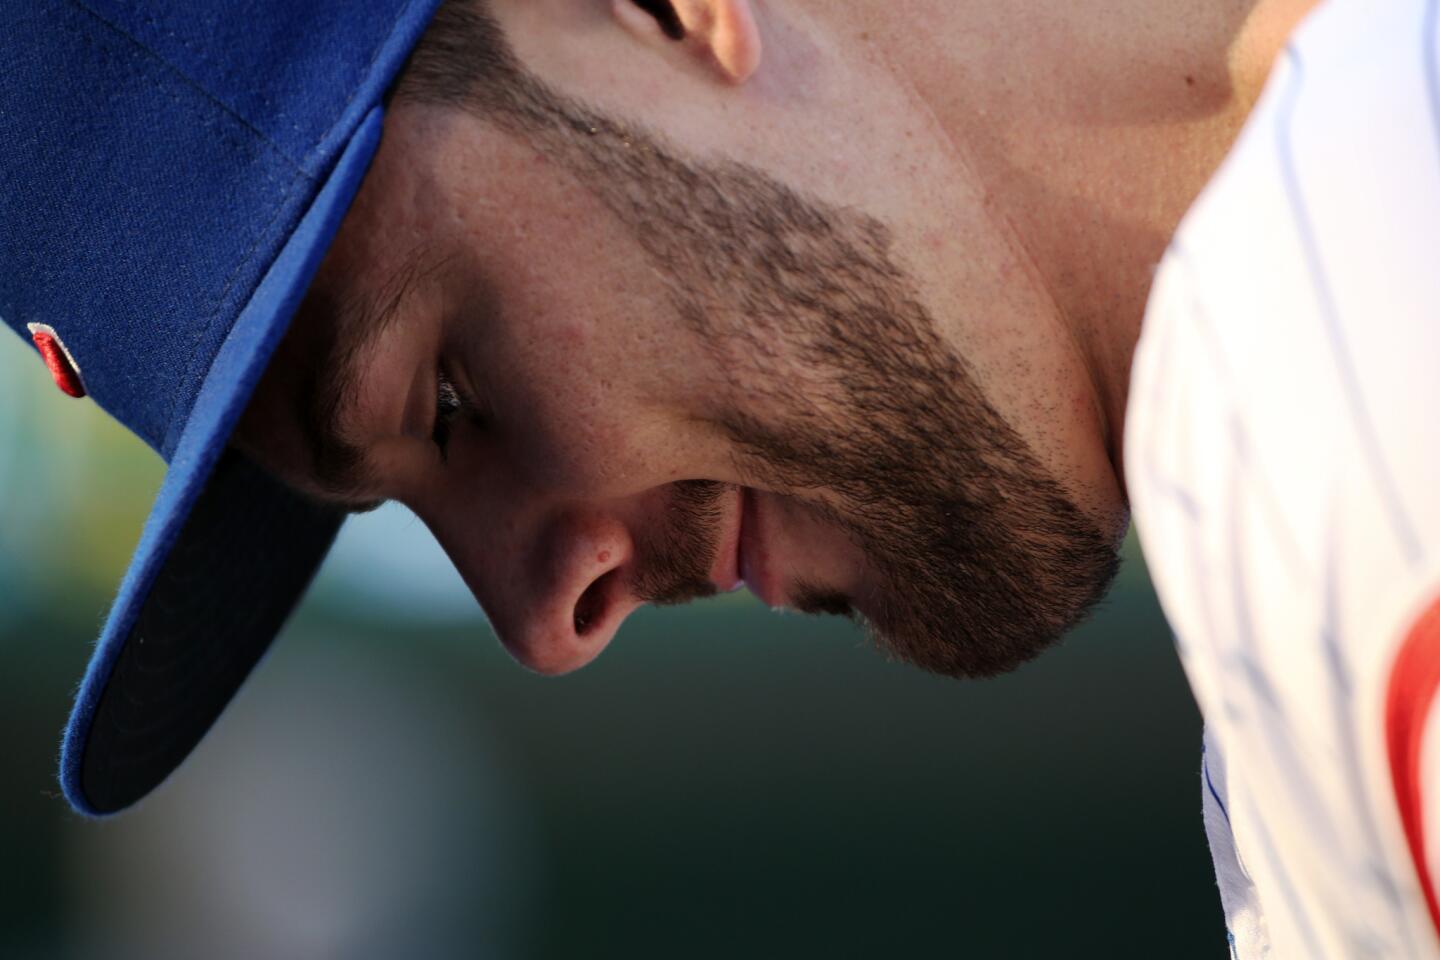 Kris Bryant signs autographs before a game against the Diamondbacks at Wrigley Field on Aug. 1, 2017.